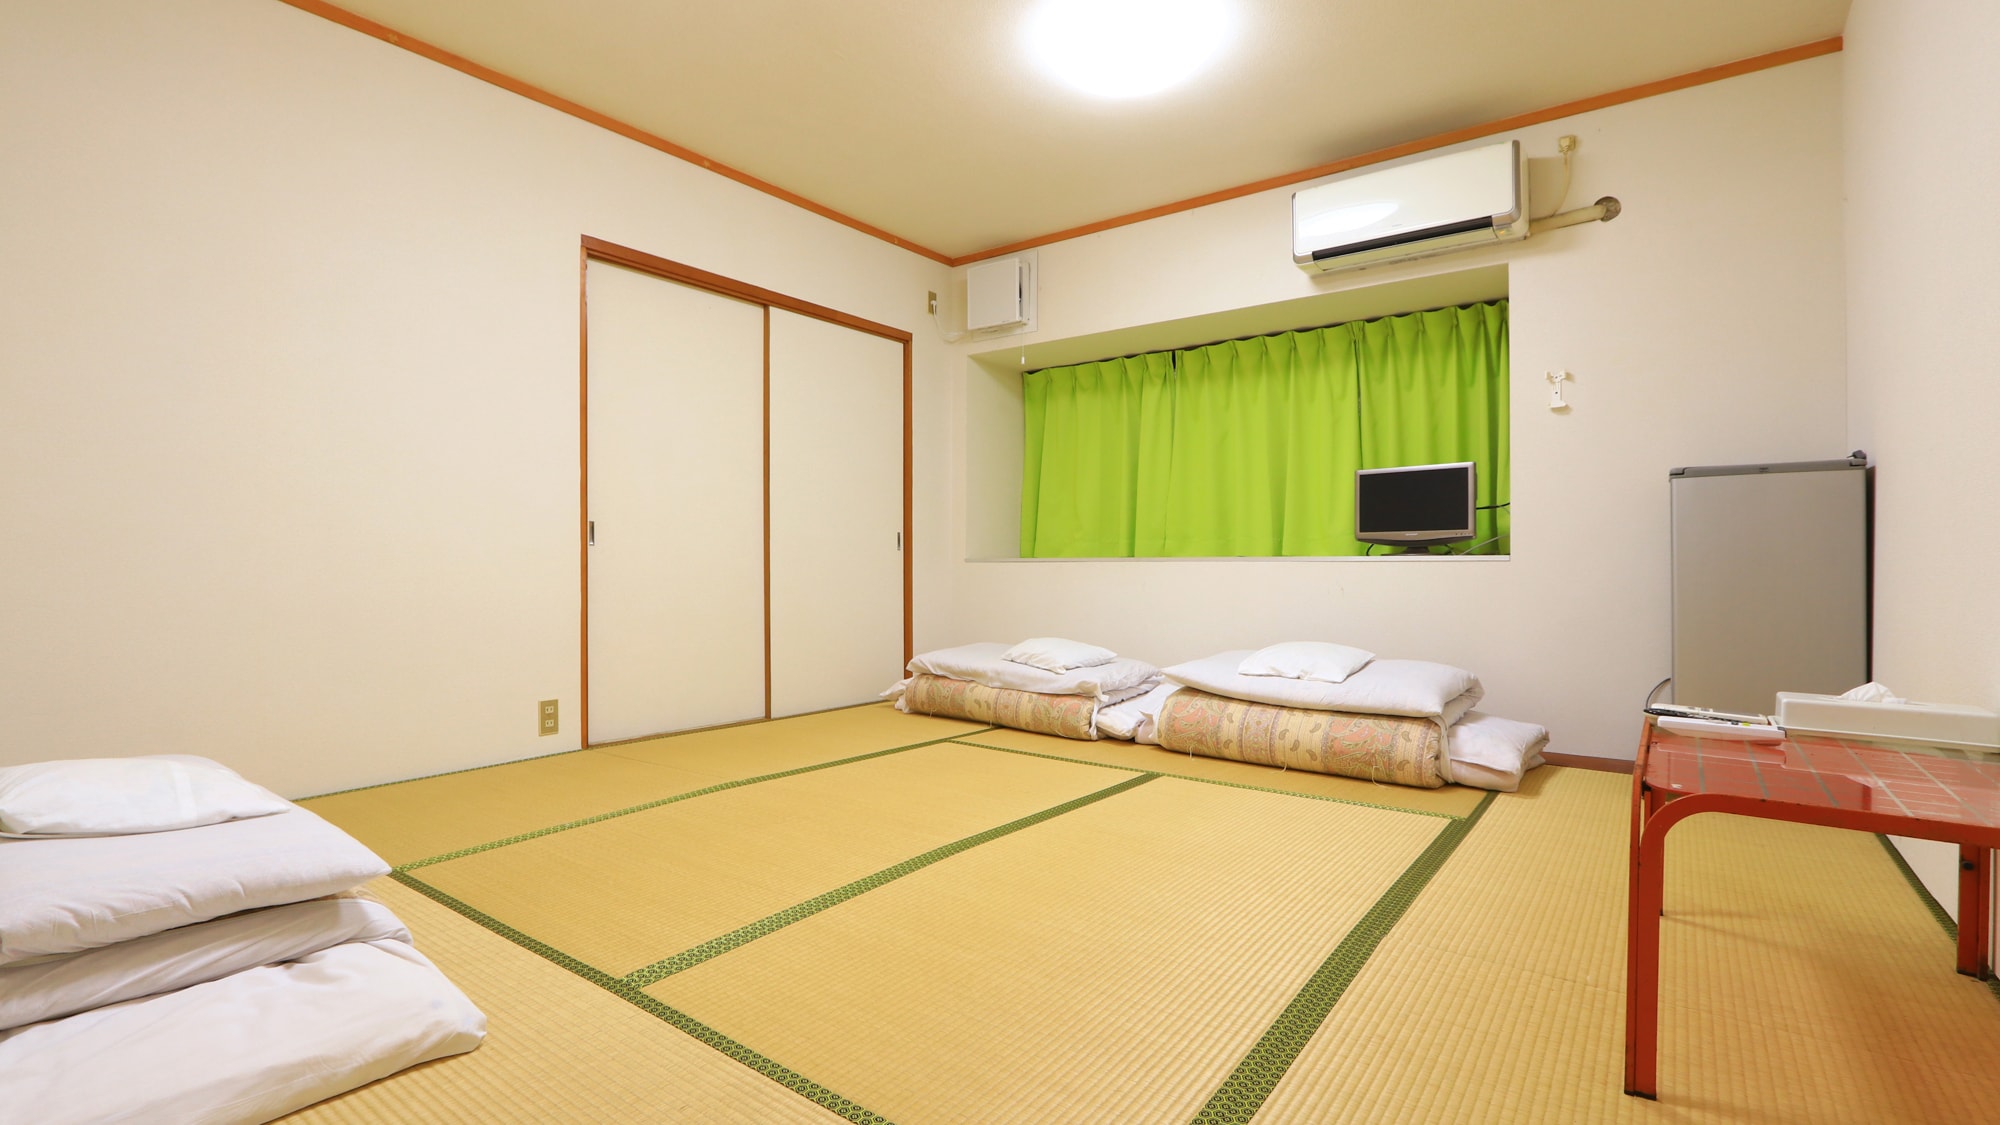 [Room 6] Japanese style room with 8 tatami mats